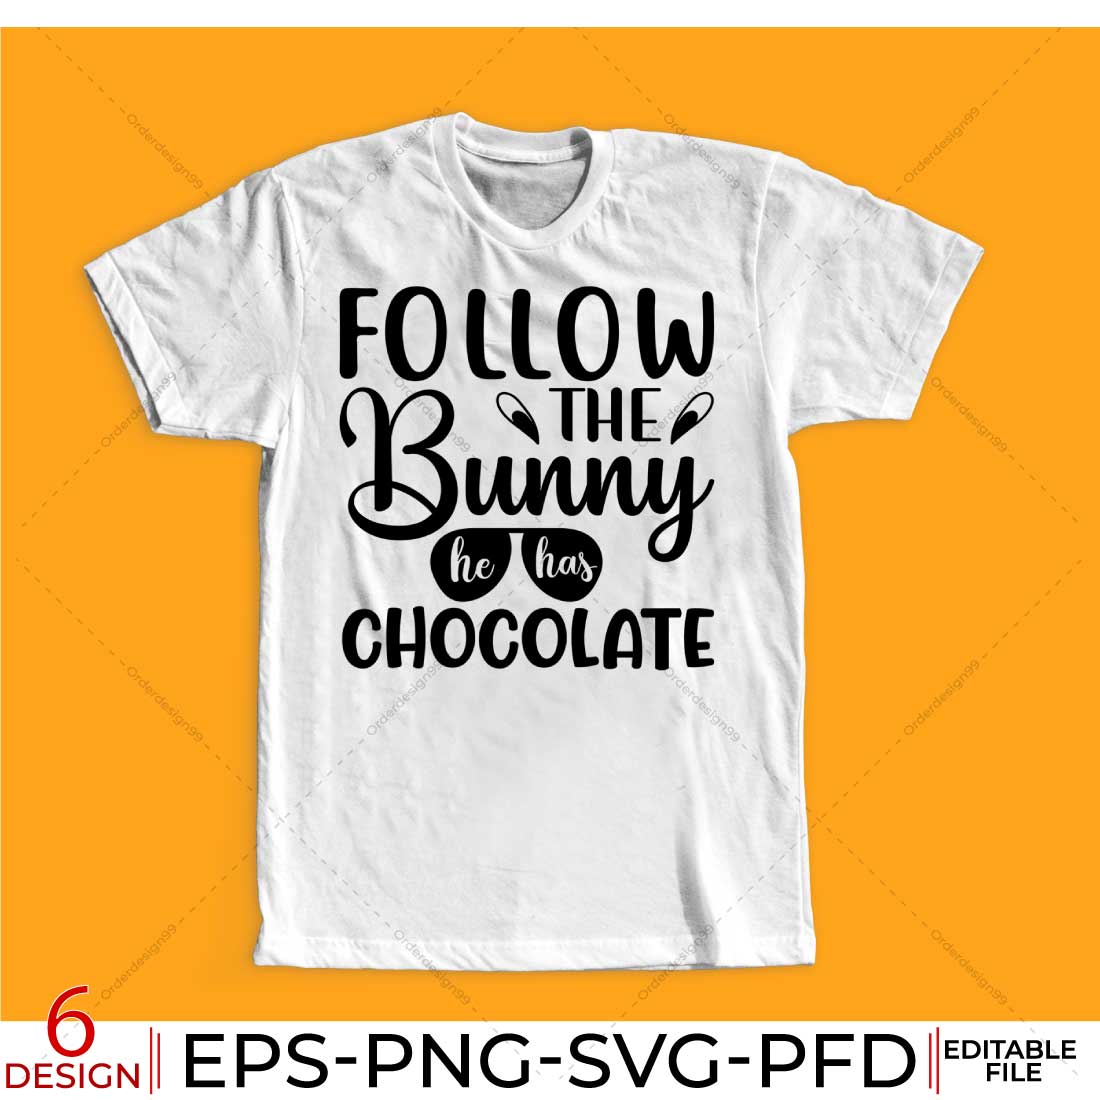 T - shirt that says follow the bunny to try chocolate.